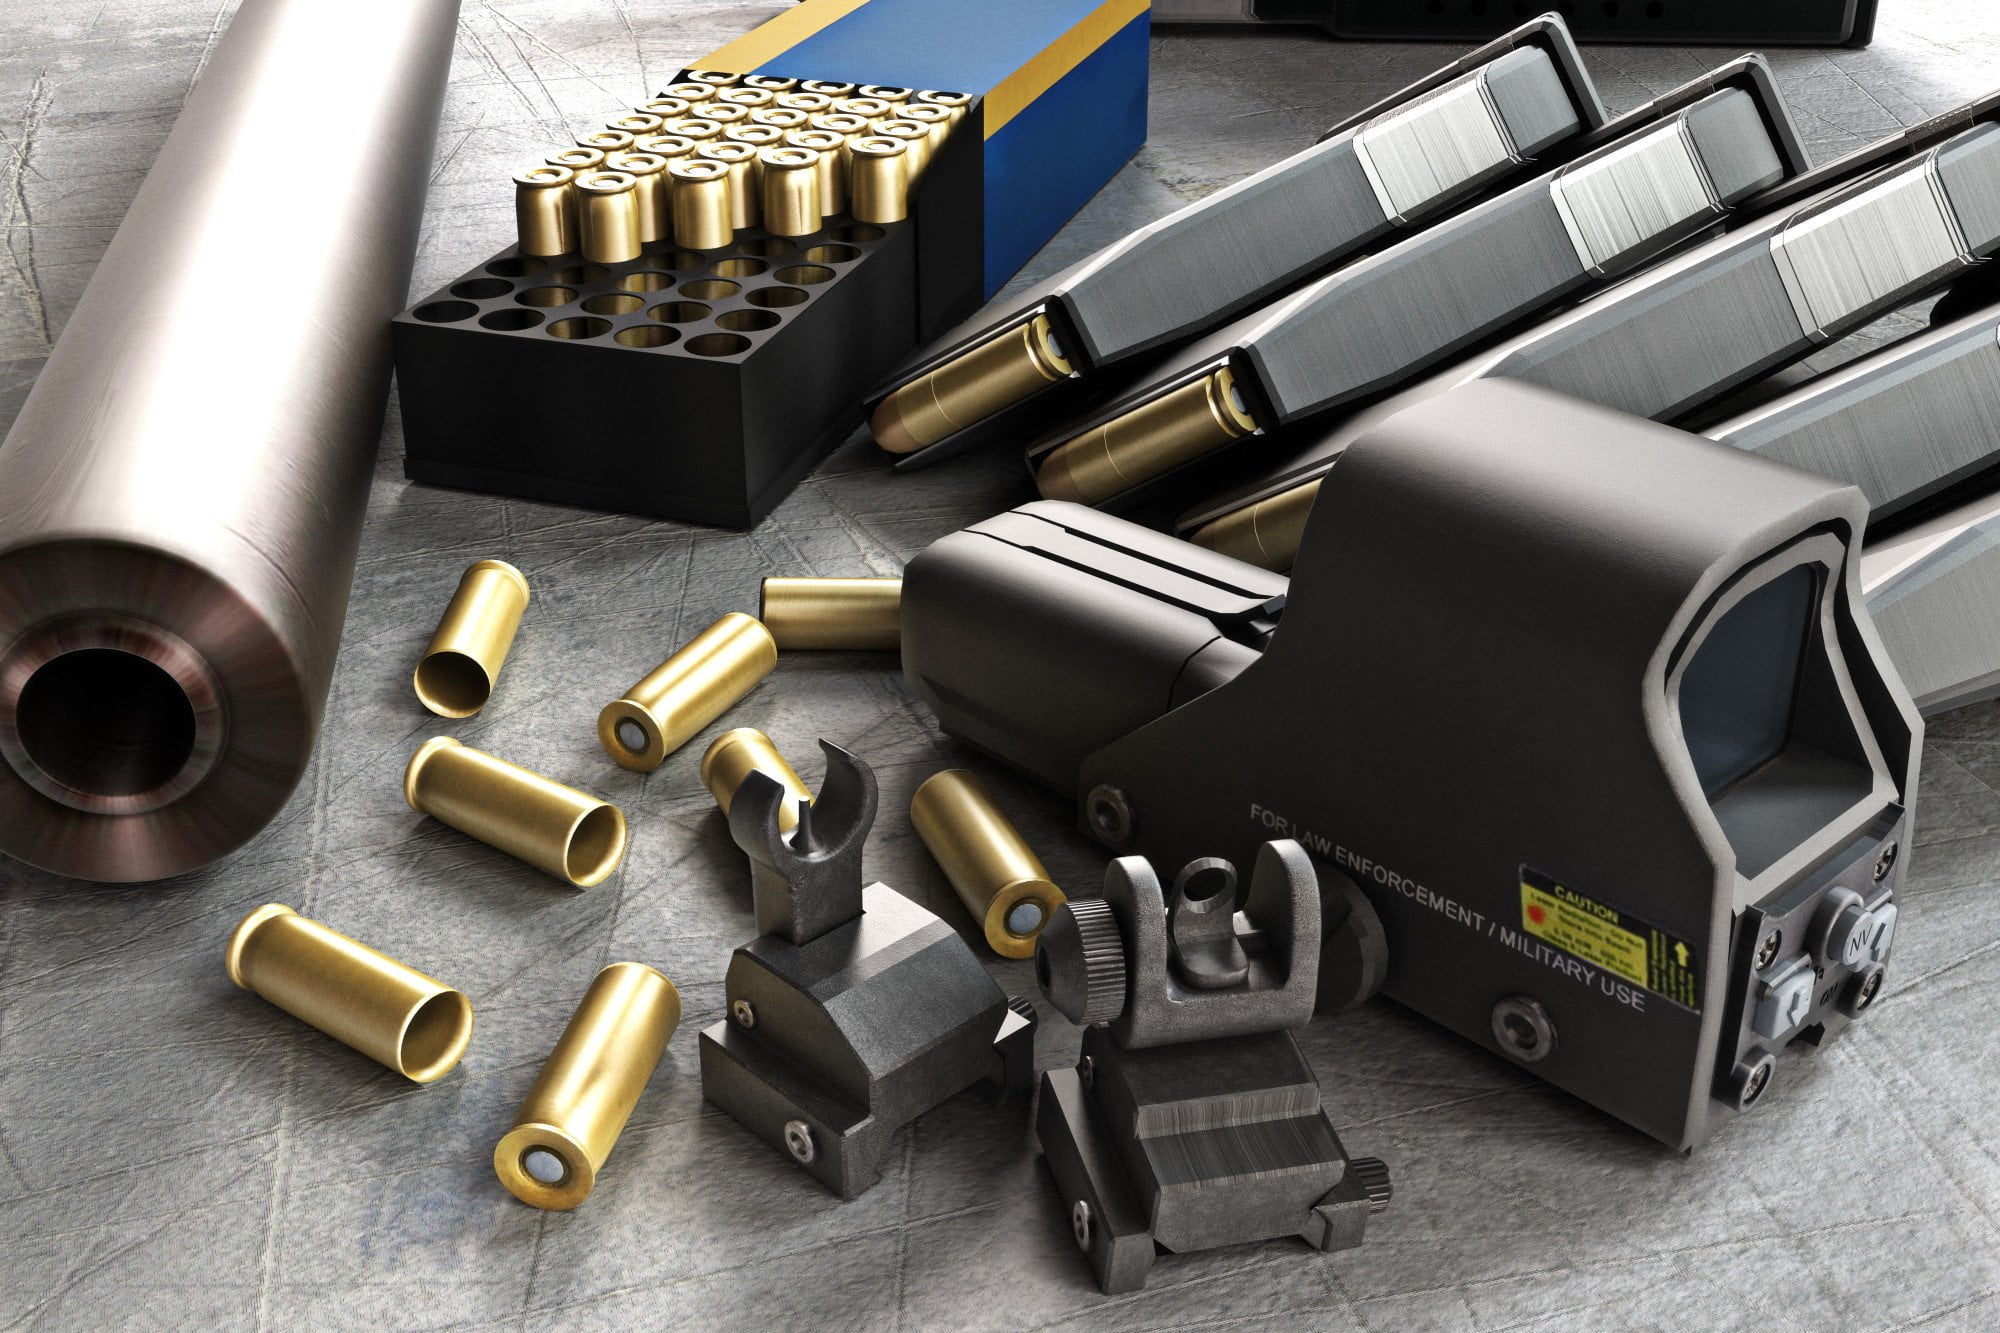 As a gun enthusiast, you will surely want to enhance the performance of your gun. Getting the best gun accessories would surely be interesting for any gun owner